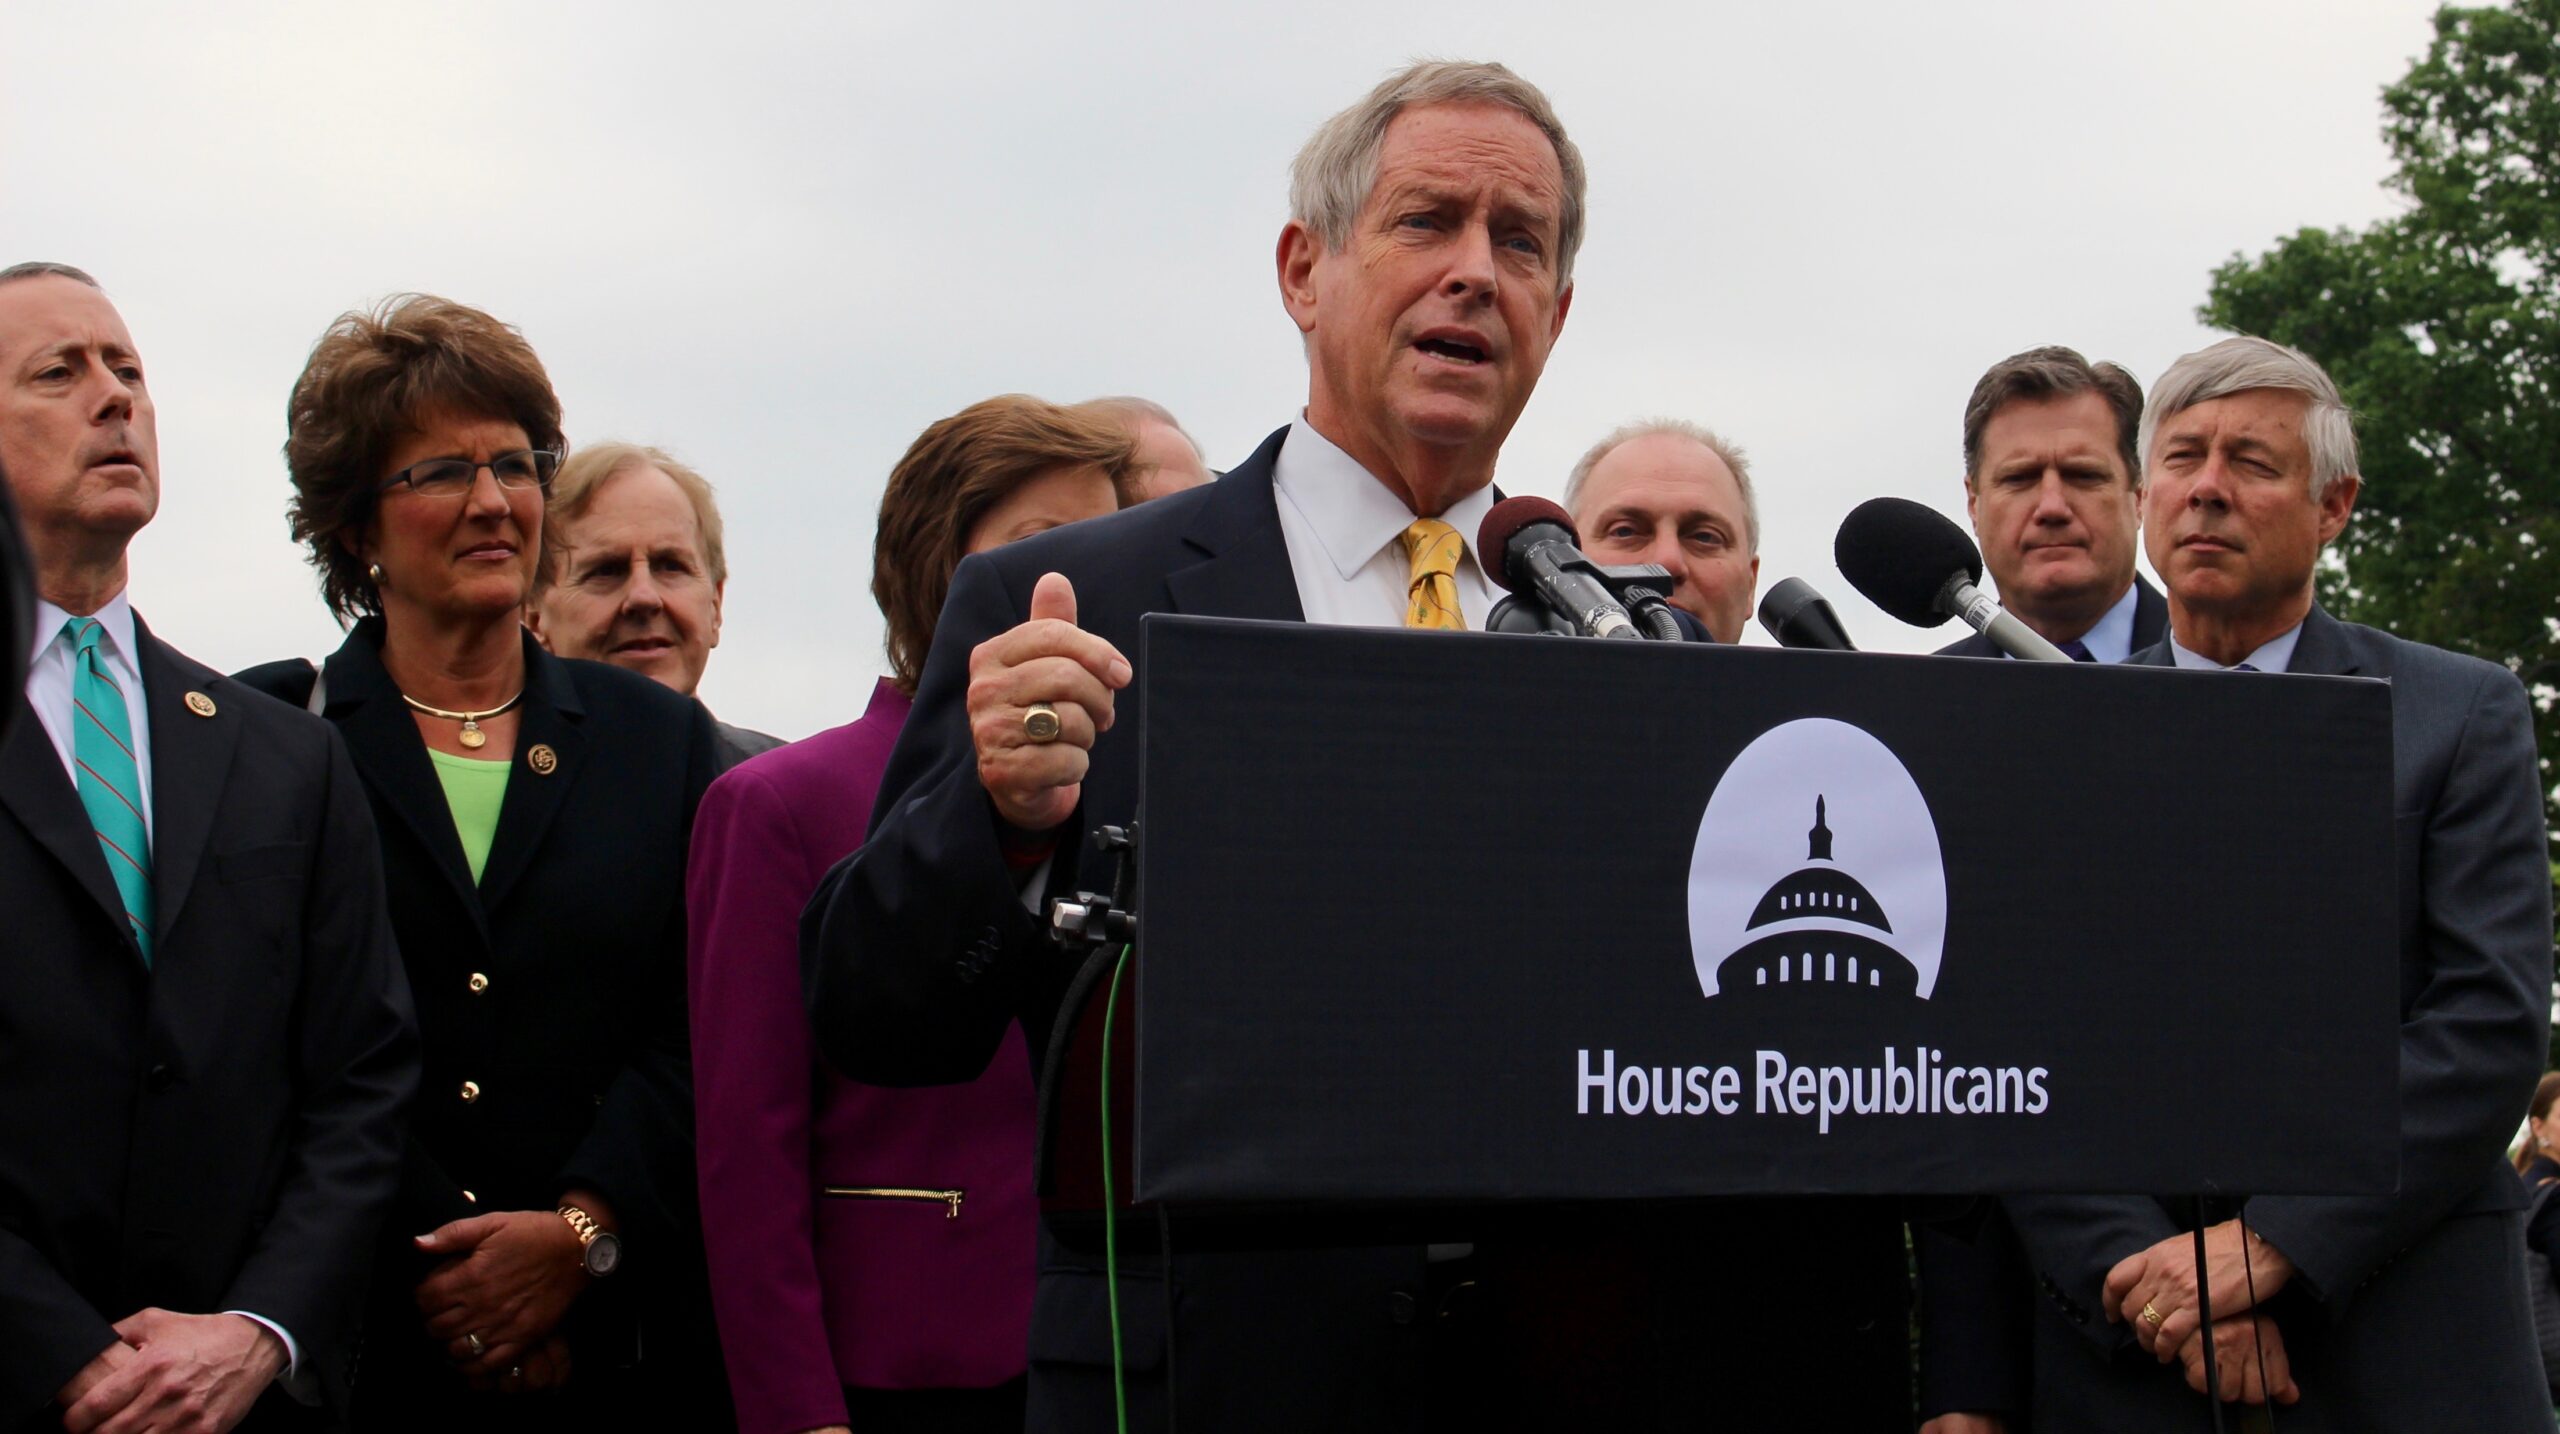 Fix Rules Of Engagement For Afghanistan Fight: Rep. Joe Wilson